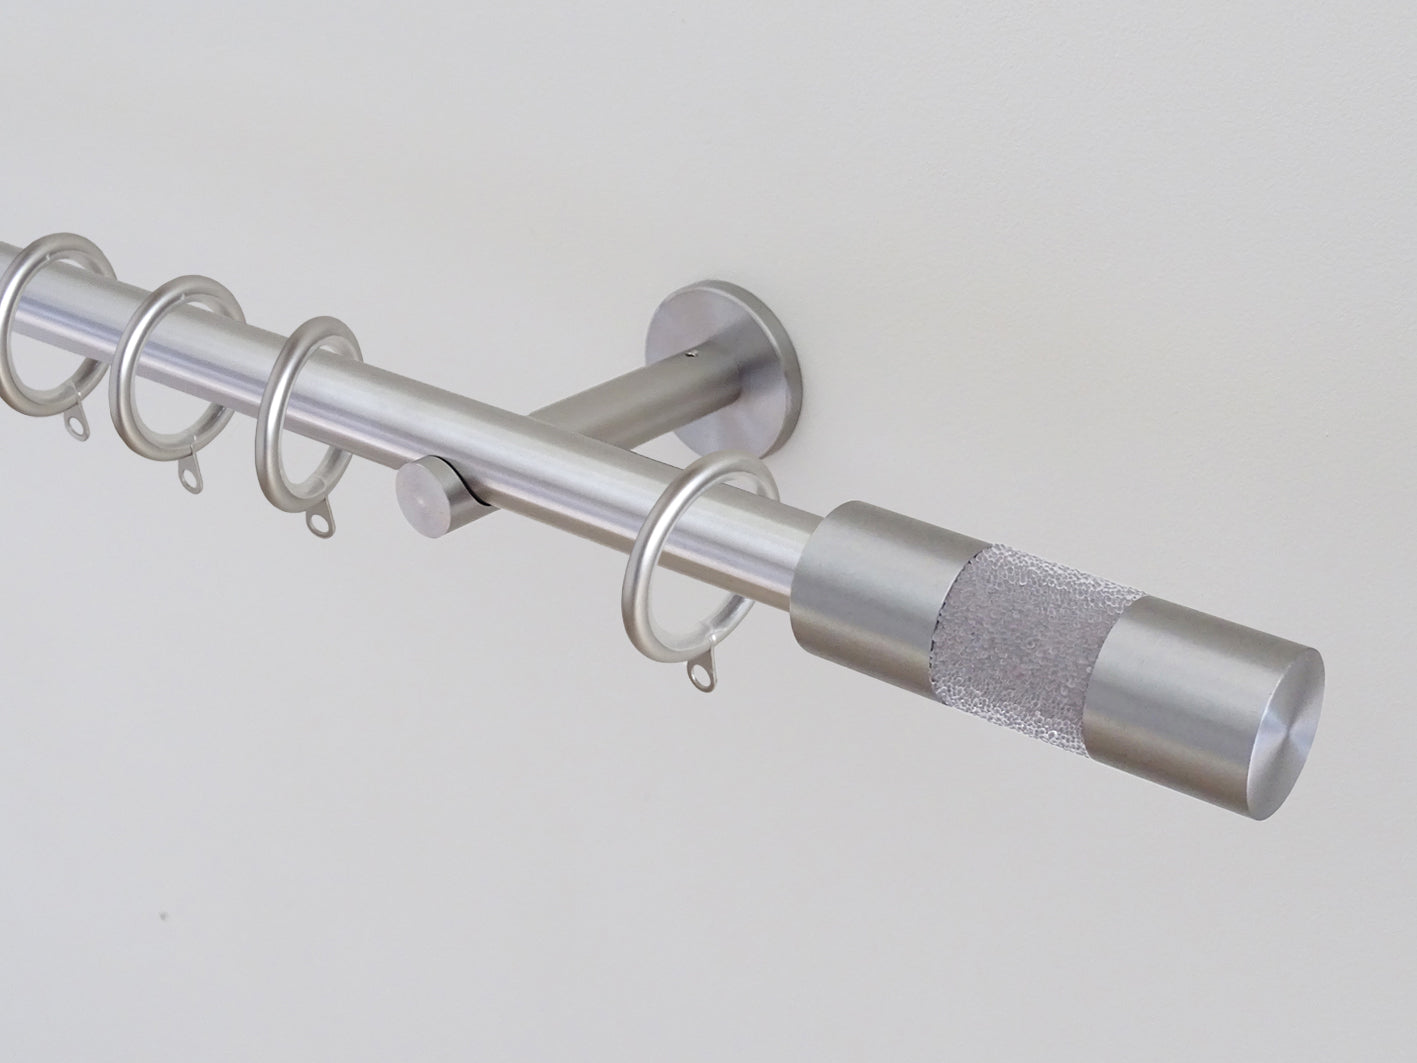 19mm diameter stainless steel curtain pole sets with steel barrel finials in oyster grey